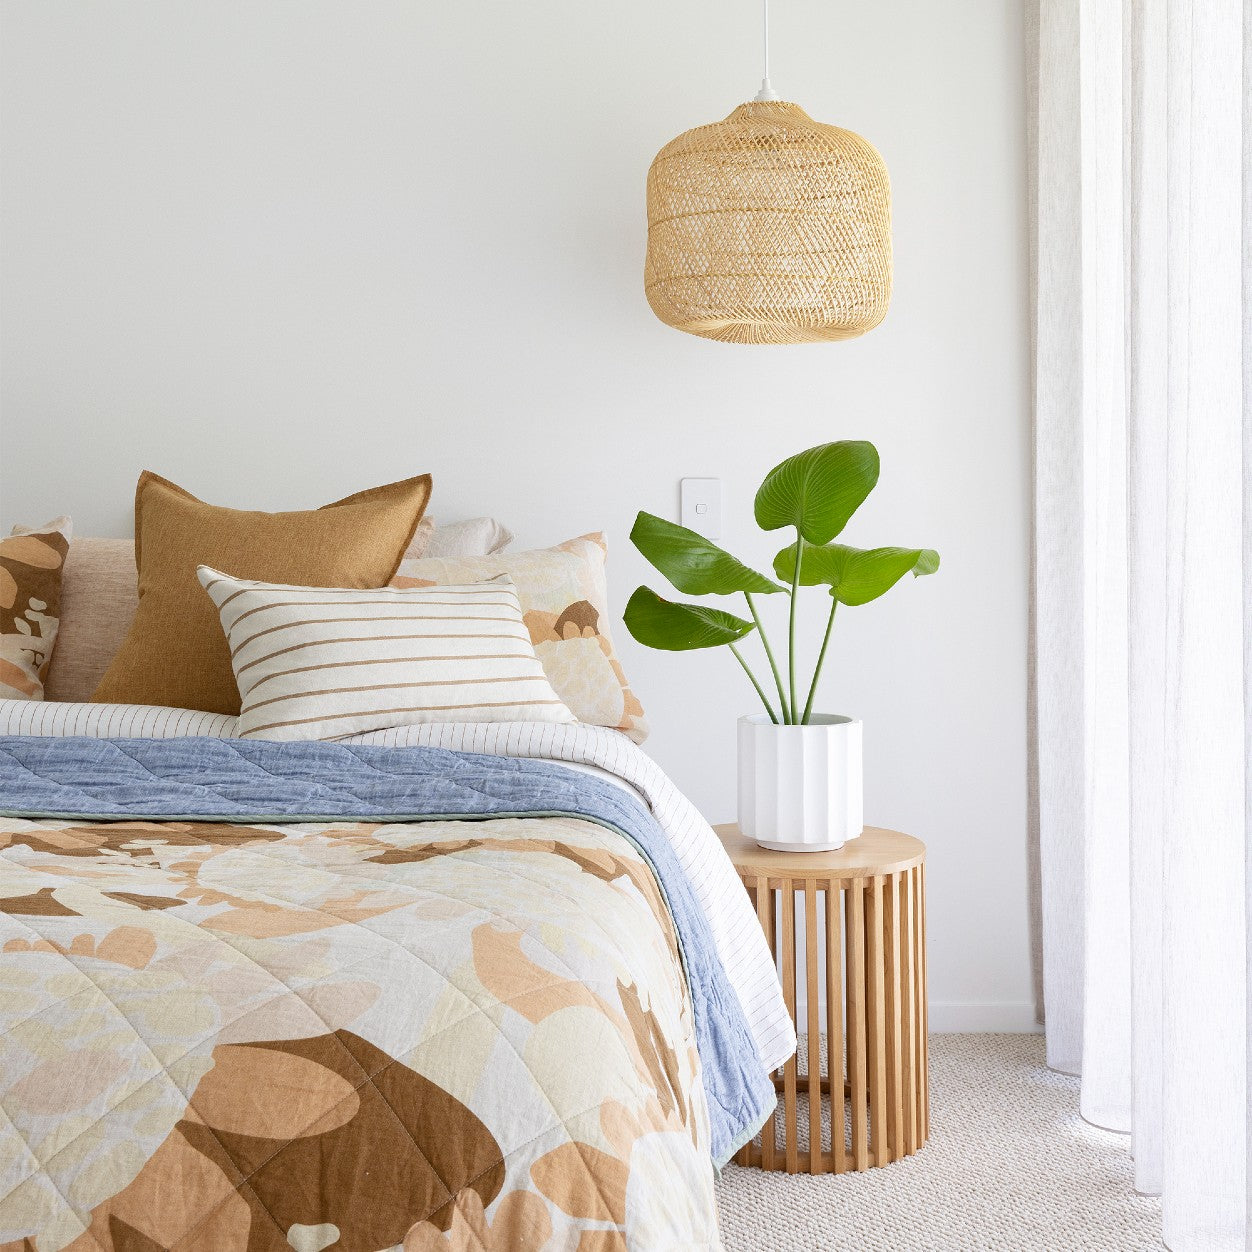 Rattan boho pendant light. Apple shaped rattan light used as a bedside pendant hanging next to retro inspired bed linen, a timber side table and a lush green plant.